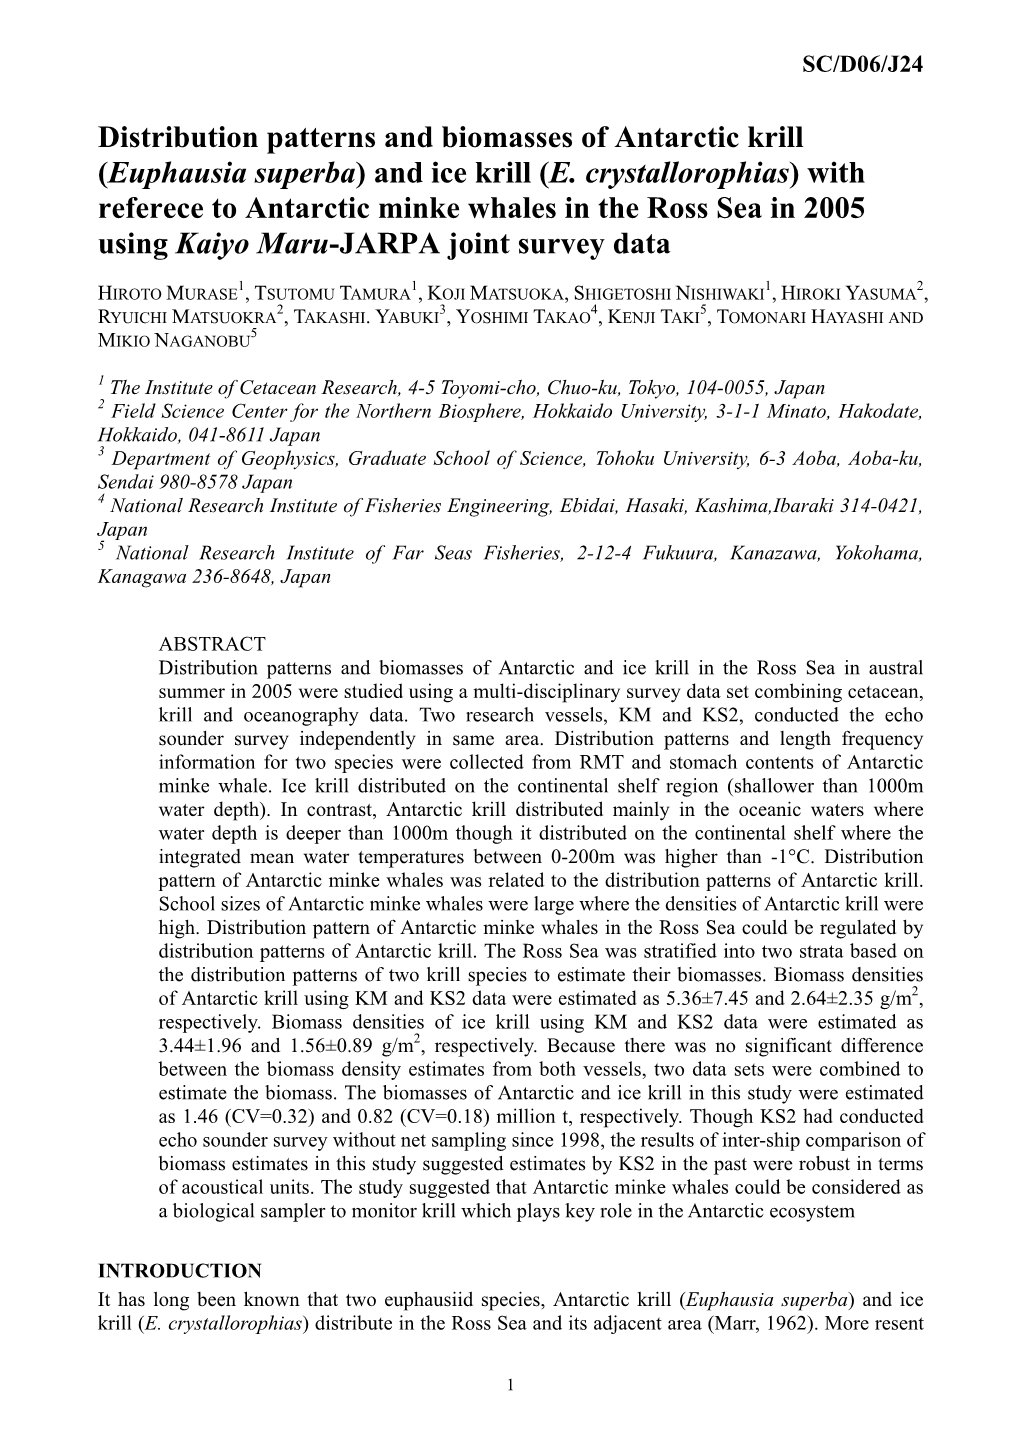 Distribution Patterns and Biomasses of Antarctic Krill (Euphausia Superba) and Ice Krill (E